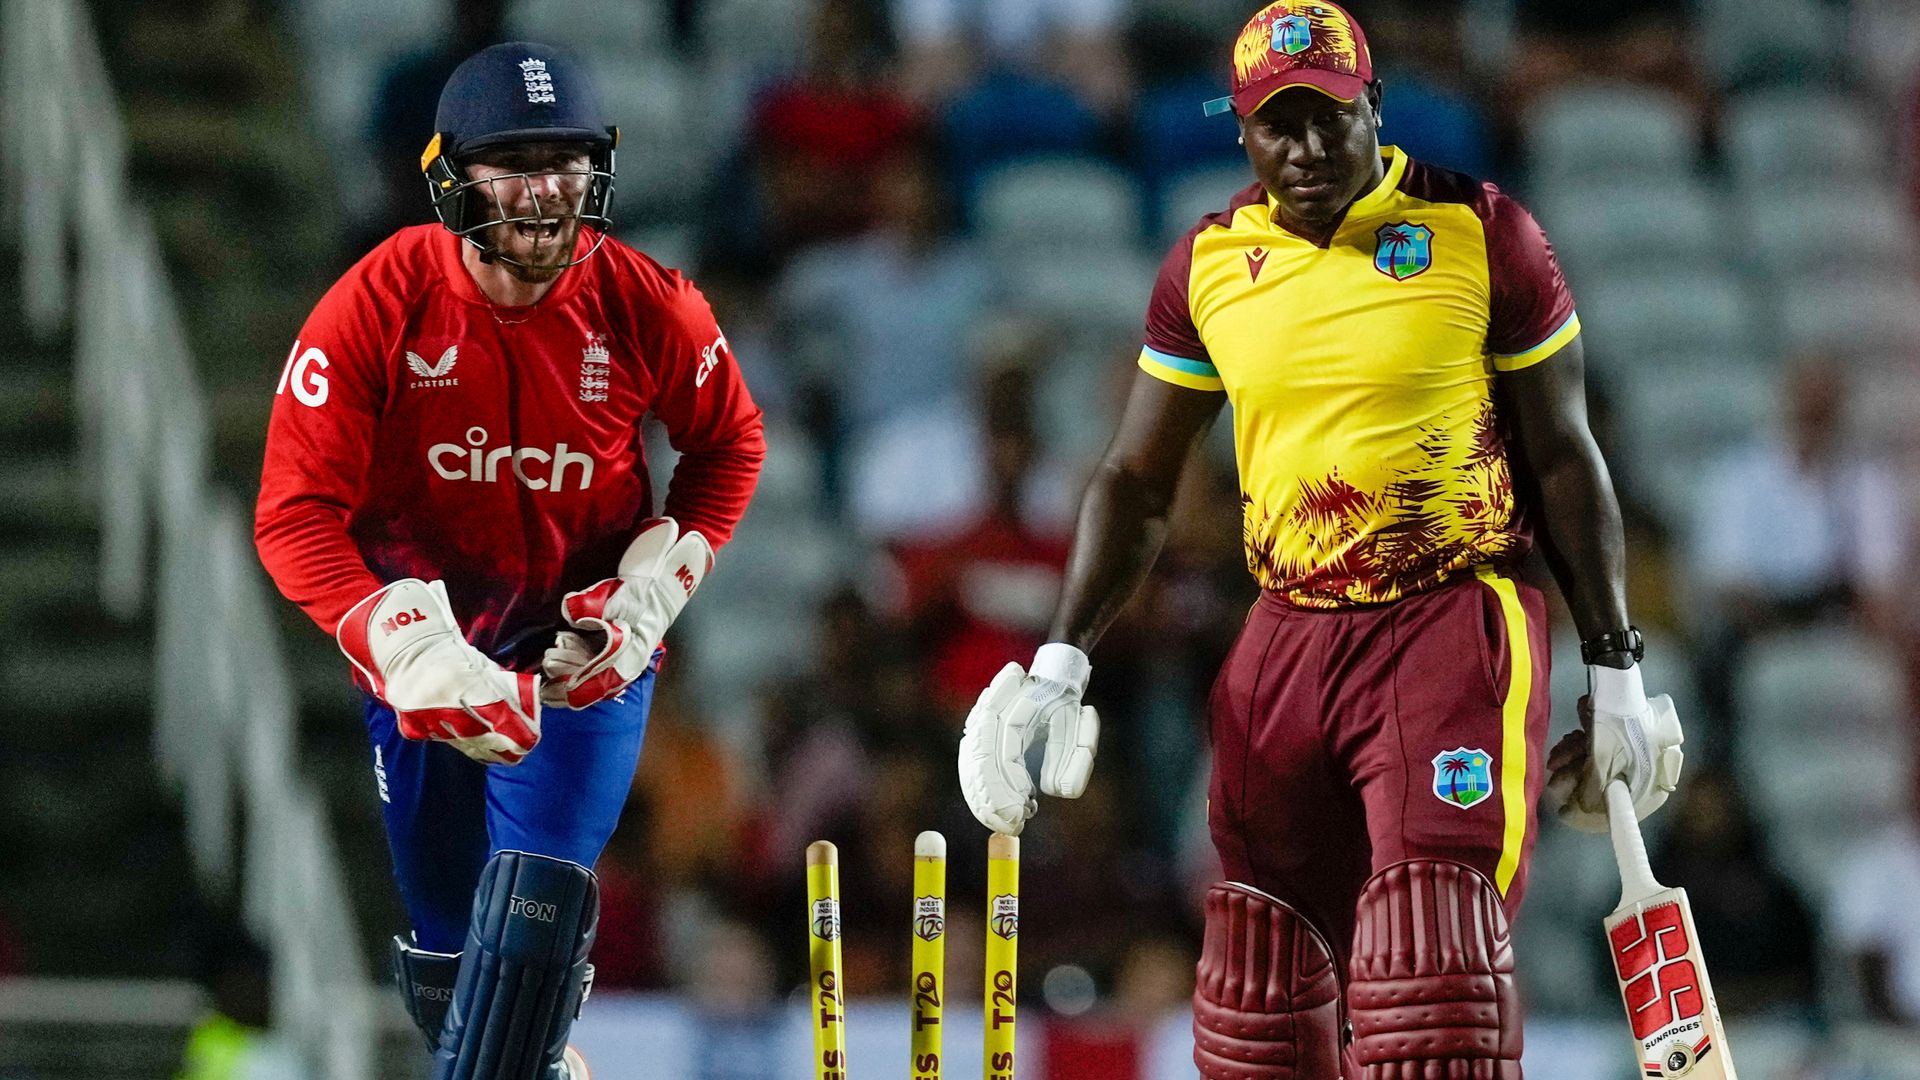 England ease to victory over West Indies after record score - as it happened